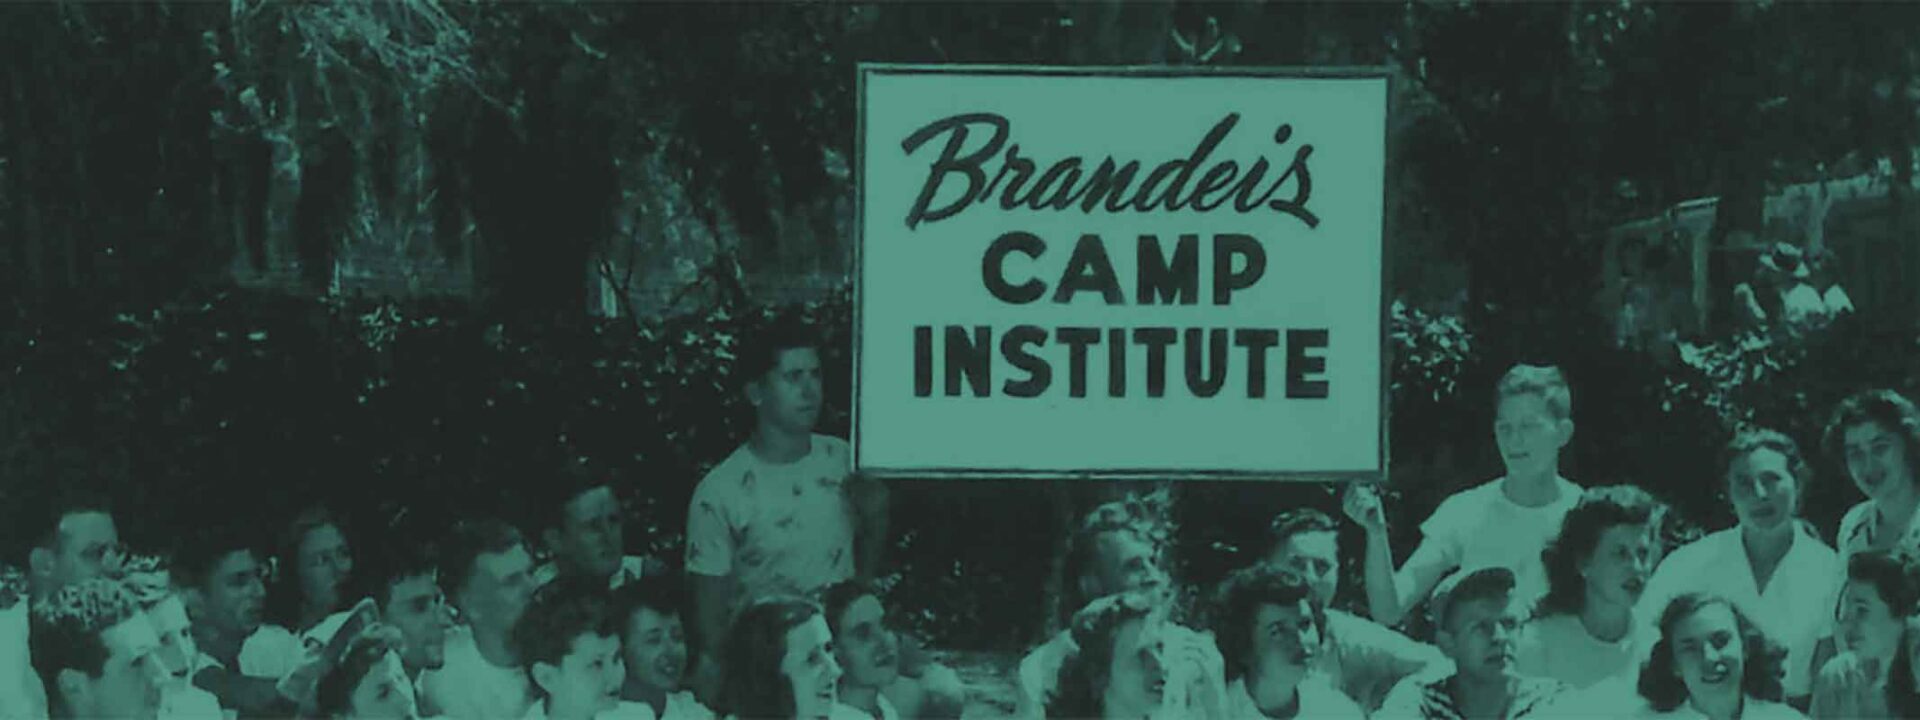 The image features a group of adults in front of a sign that reads "Brandeis Camp Institute," surrounded by greenery, conveying a communal, possibly historical setting.